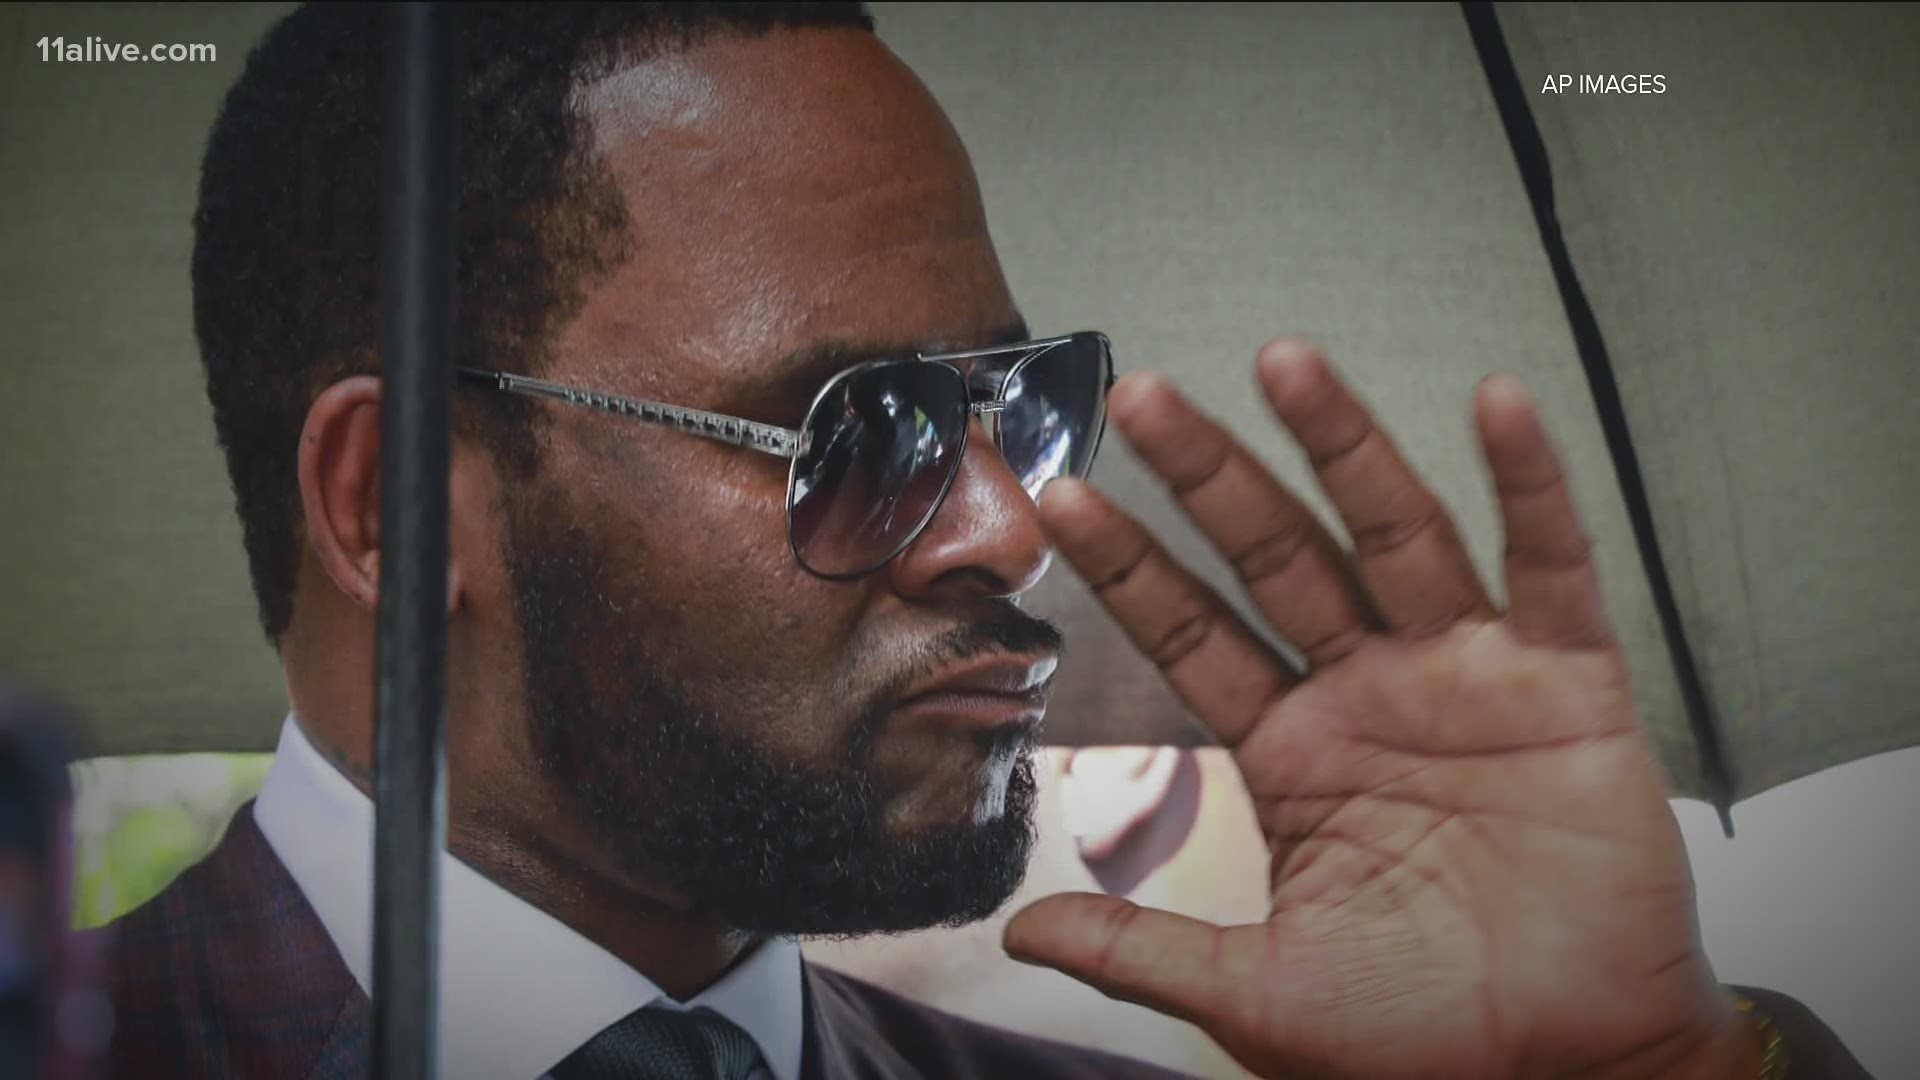 R. Kelly was attacked Wednesday when a fellow inmate entered his cell and started punching him, according to the singer's attorney.